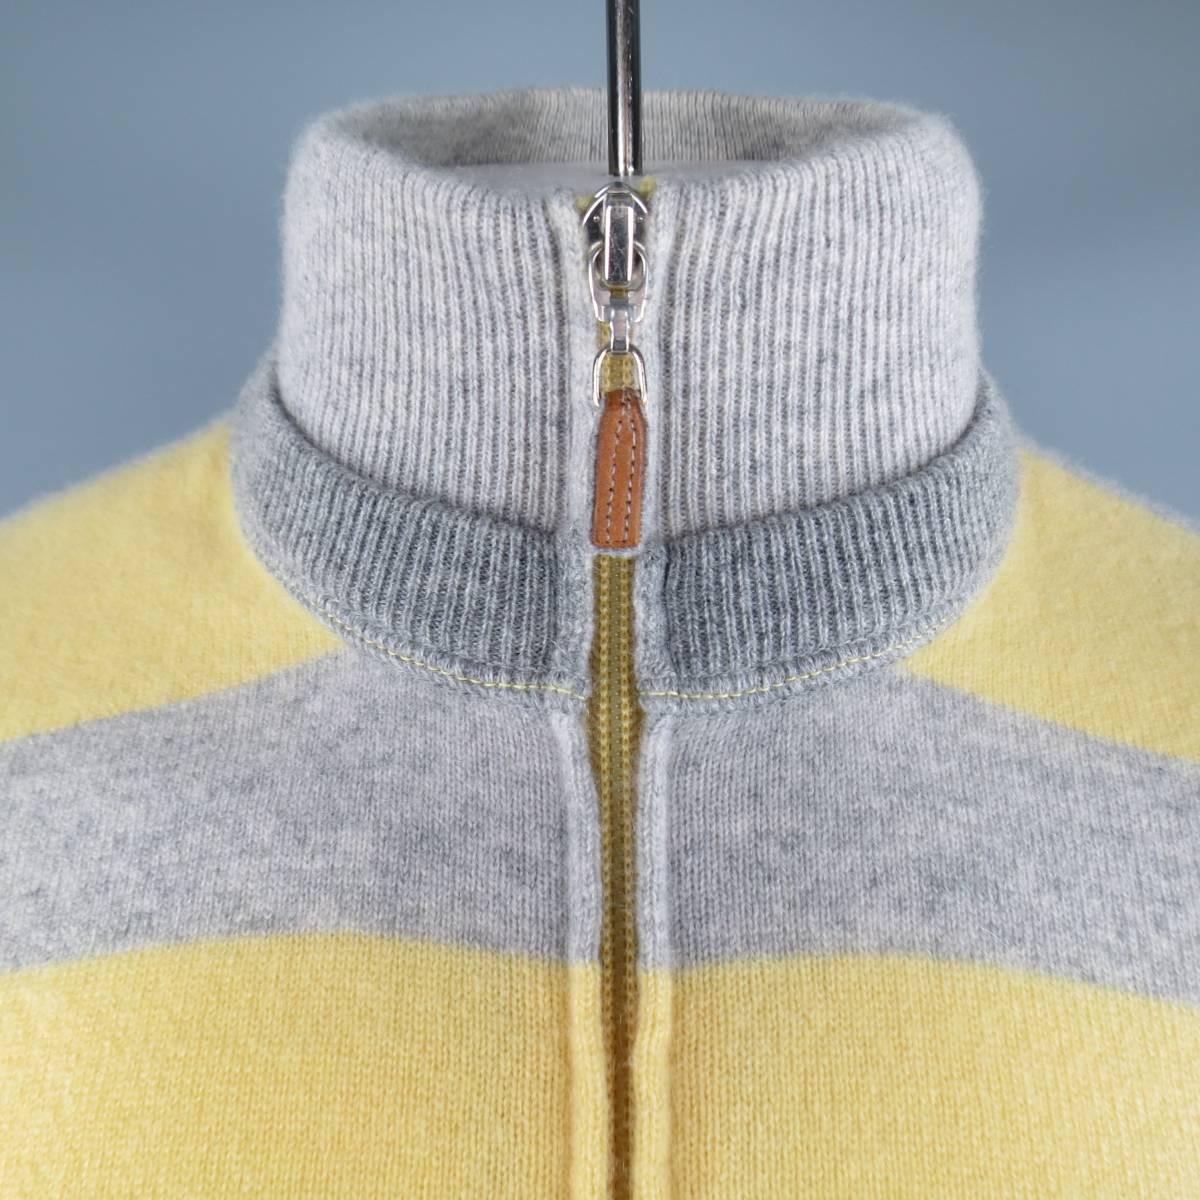 BRUNELLO CUCINELLI Cardigan consists of 100% cashmere material in a grey and yellow. Designed with a zip-up front, double collar and multi-color stripe pattern. Detailed rib cuffs and hem. Made in Italy.
 
Excellent Pre-Owned Condition 
Marked Size: